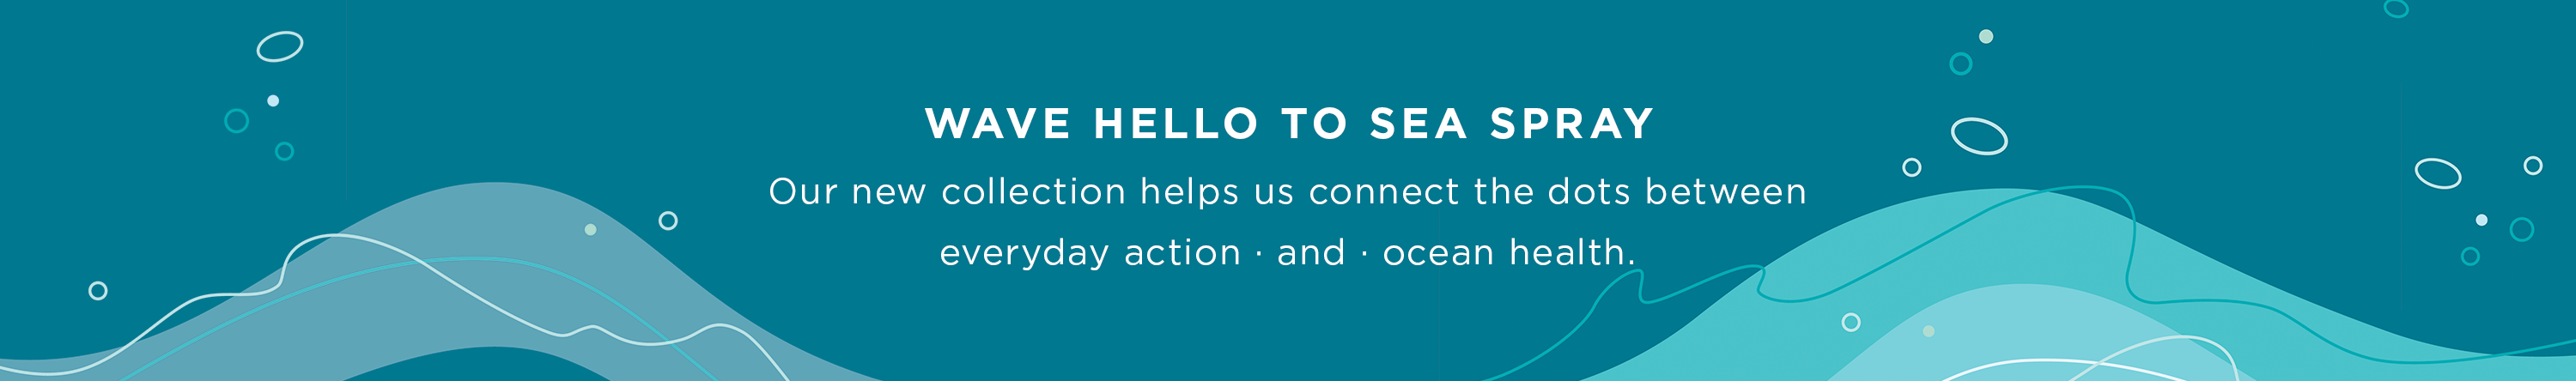 wave hello to sea spray. Our new collection helps us connect the dots between everyday actions and ocean health.